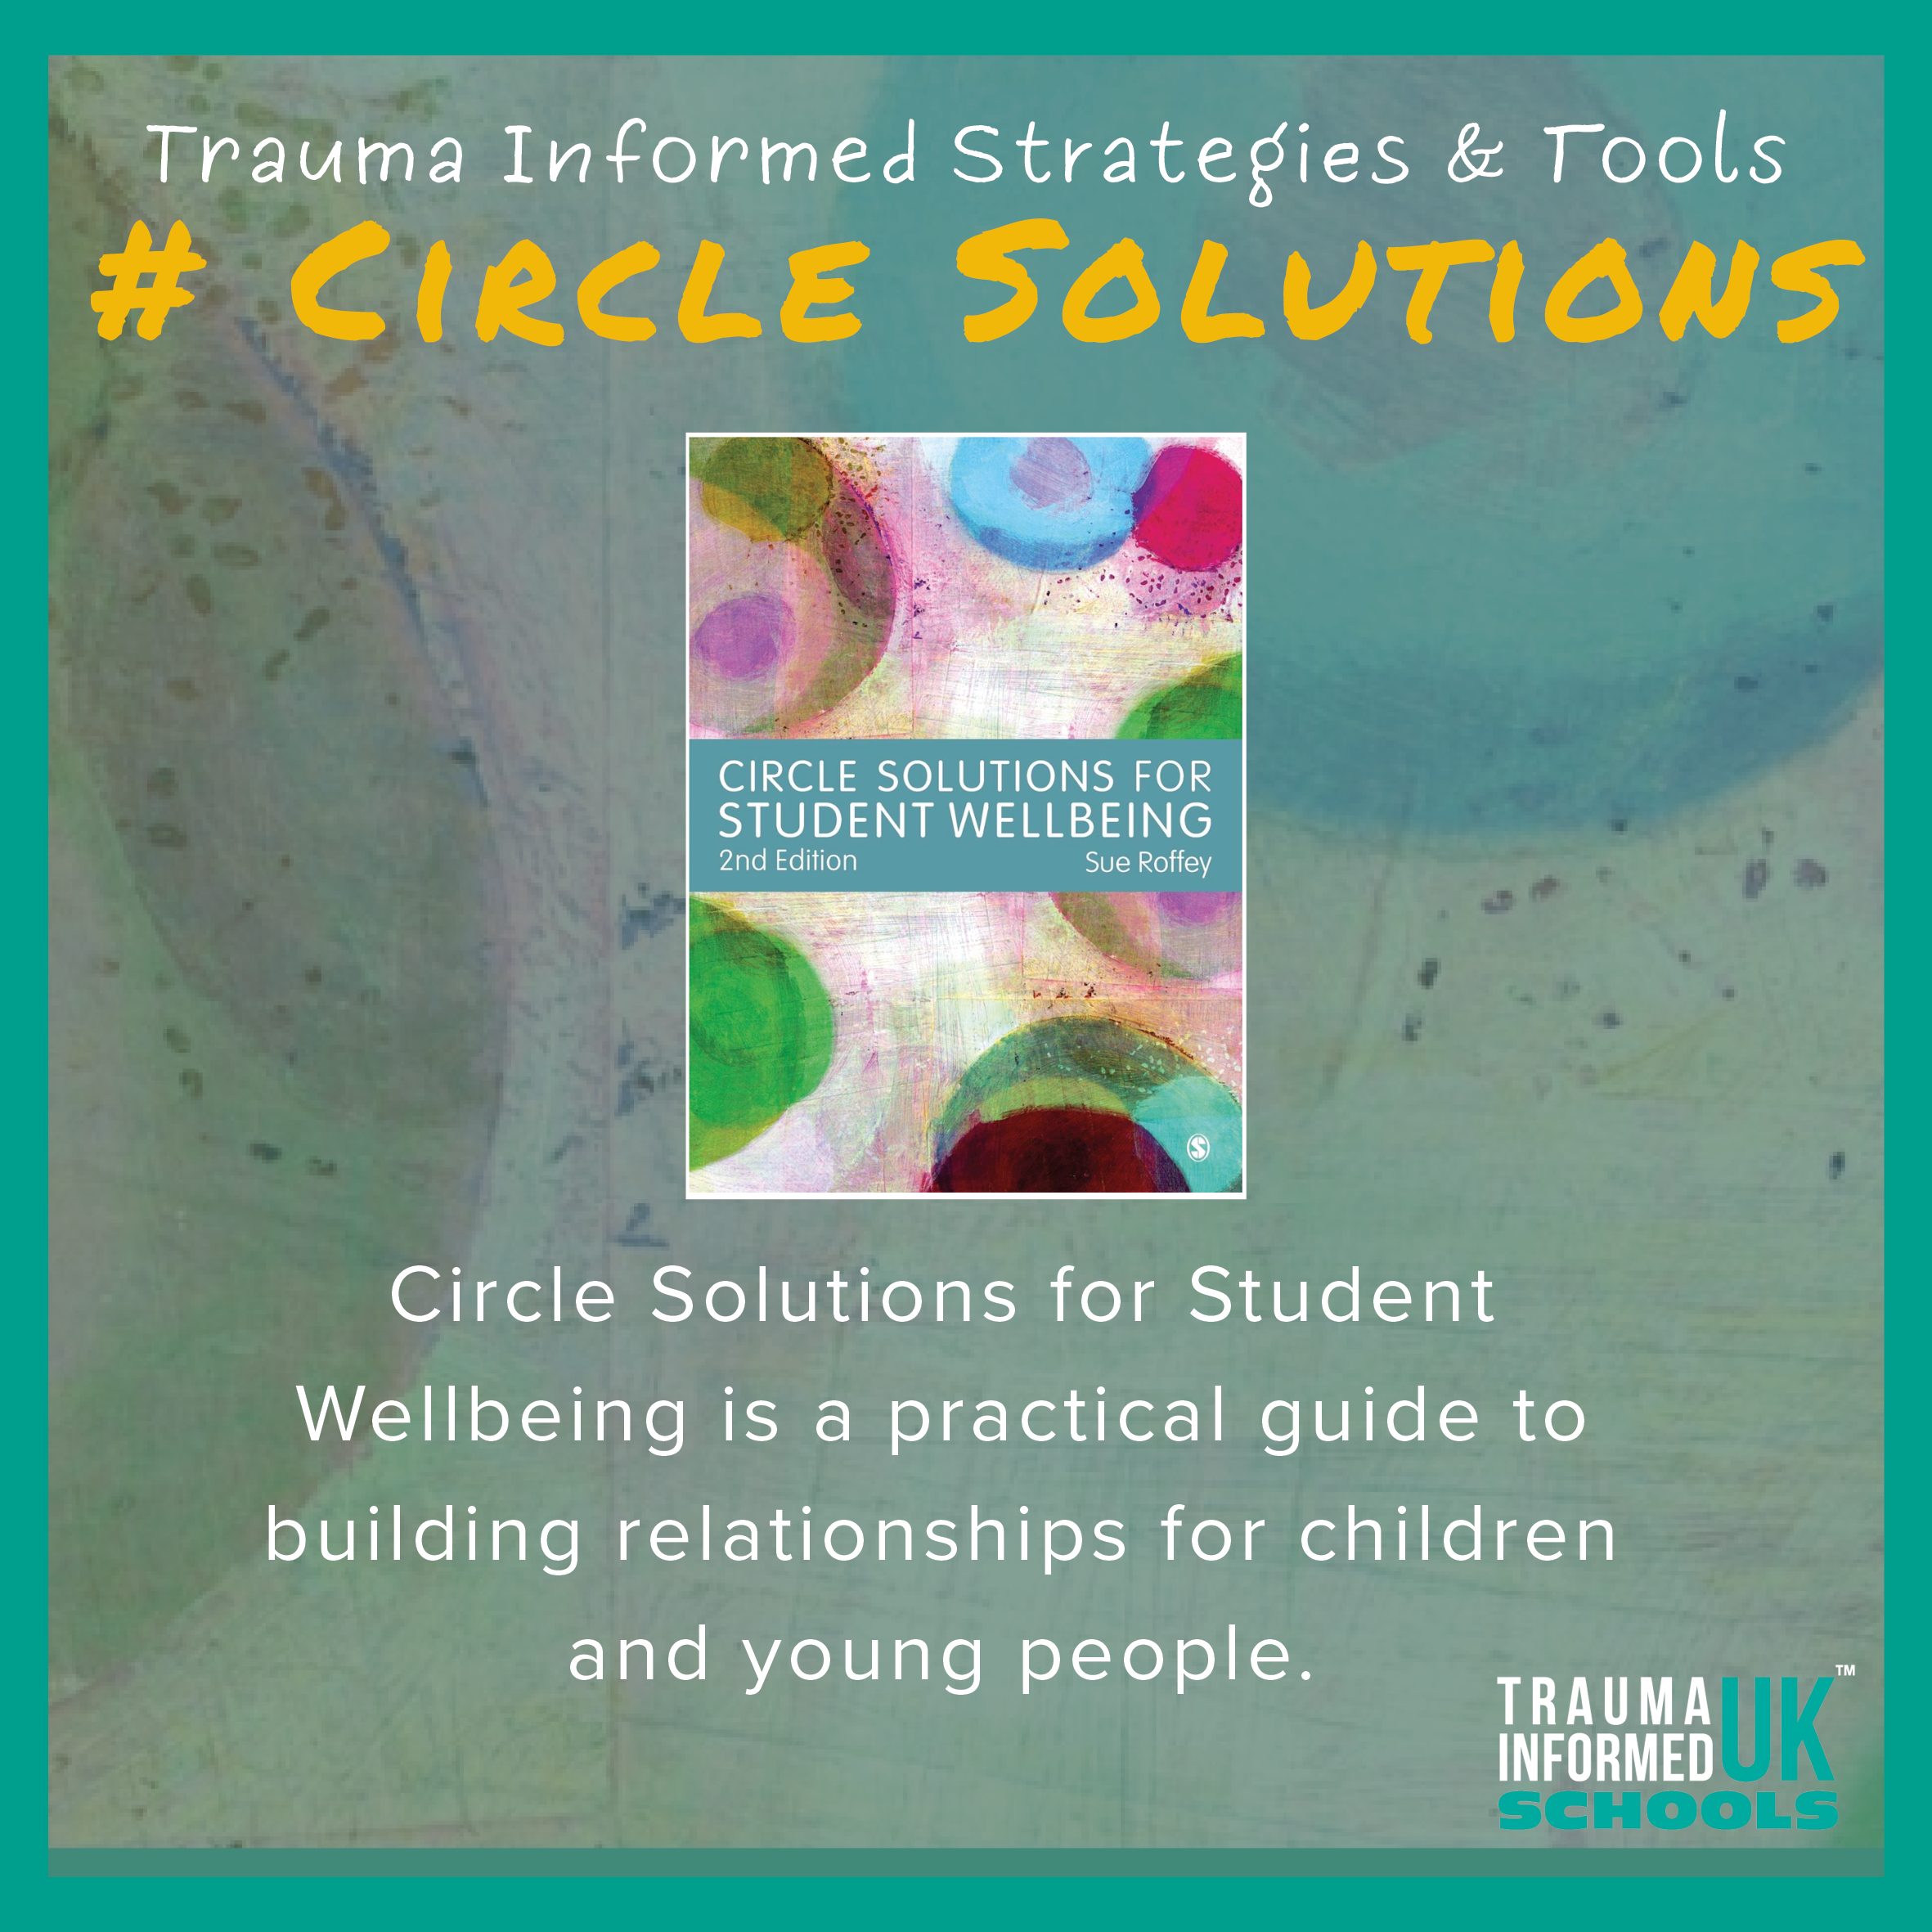 Trauma Informed Tools and Strategies Circle Solutions